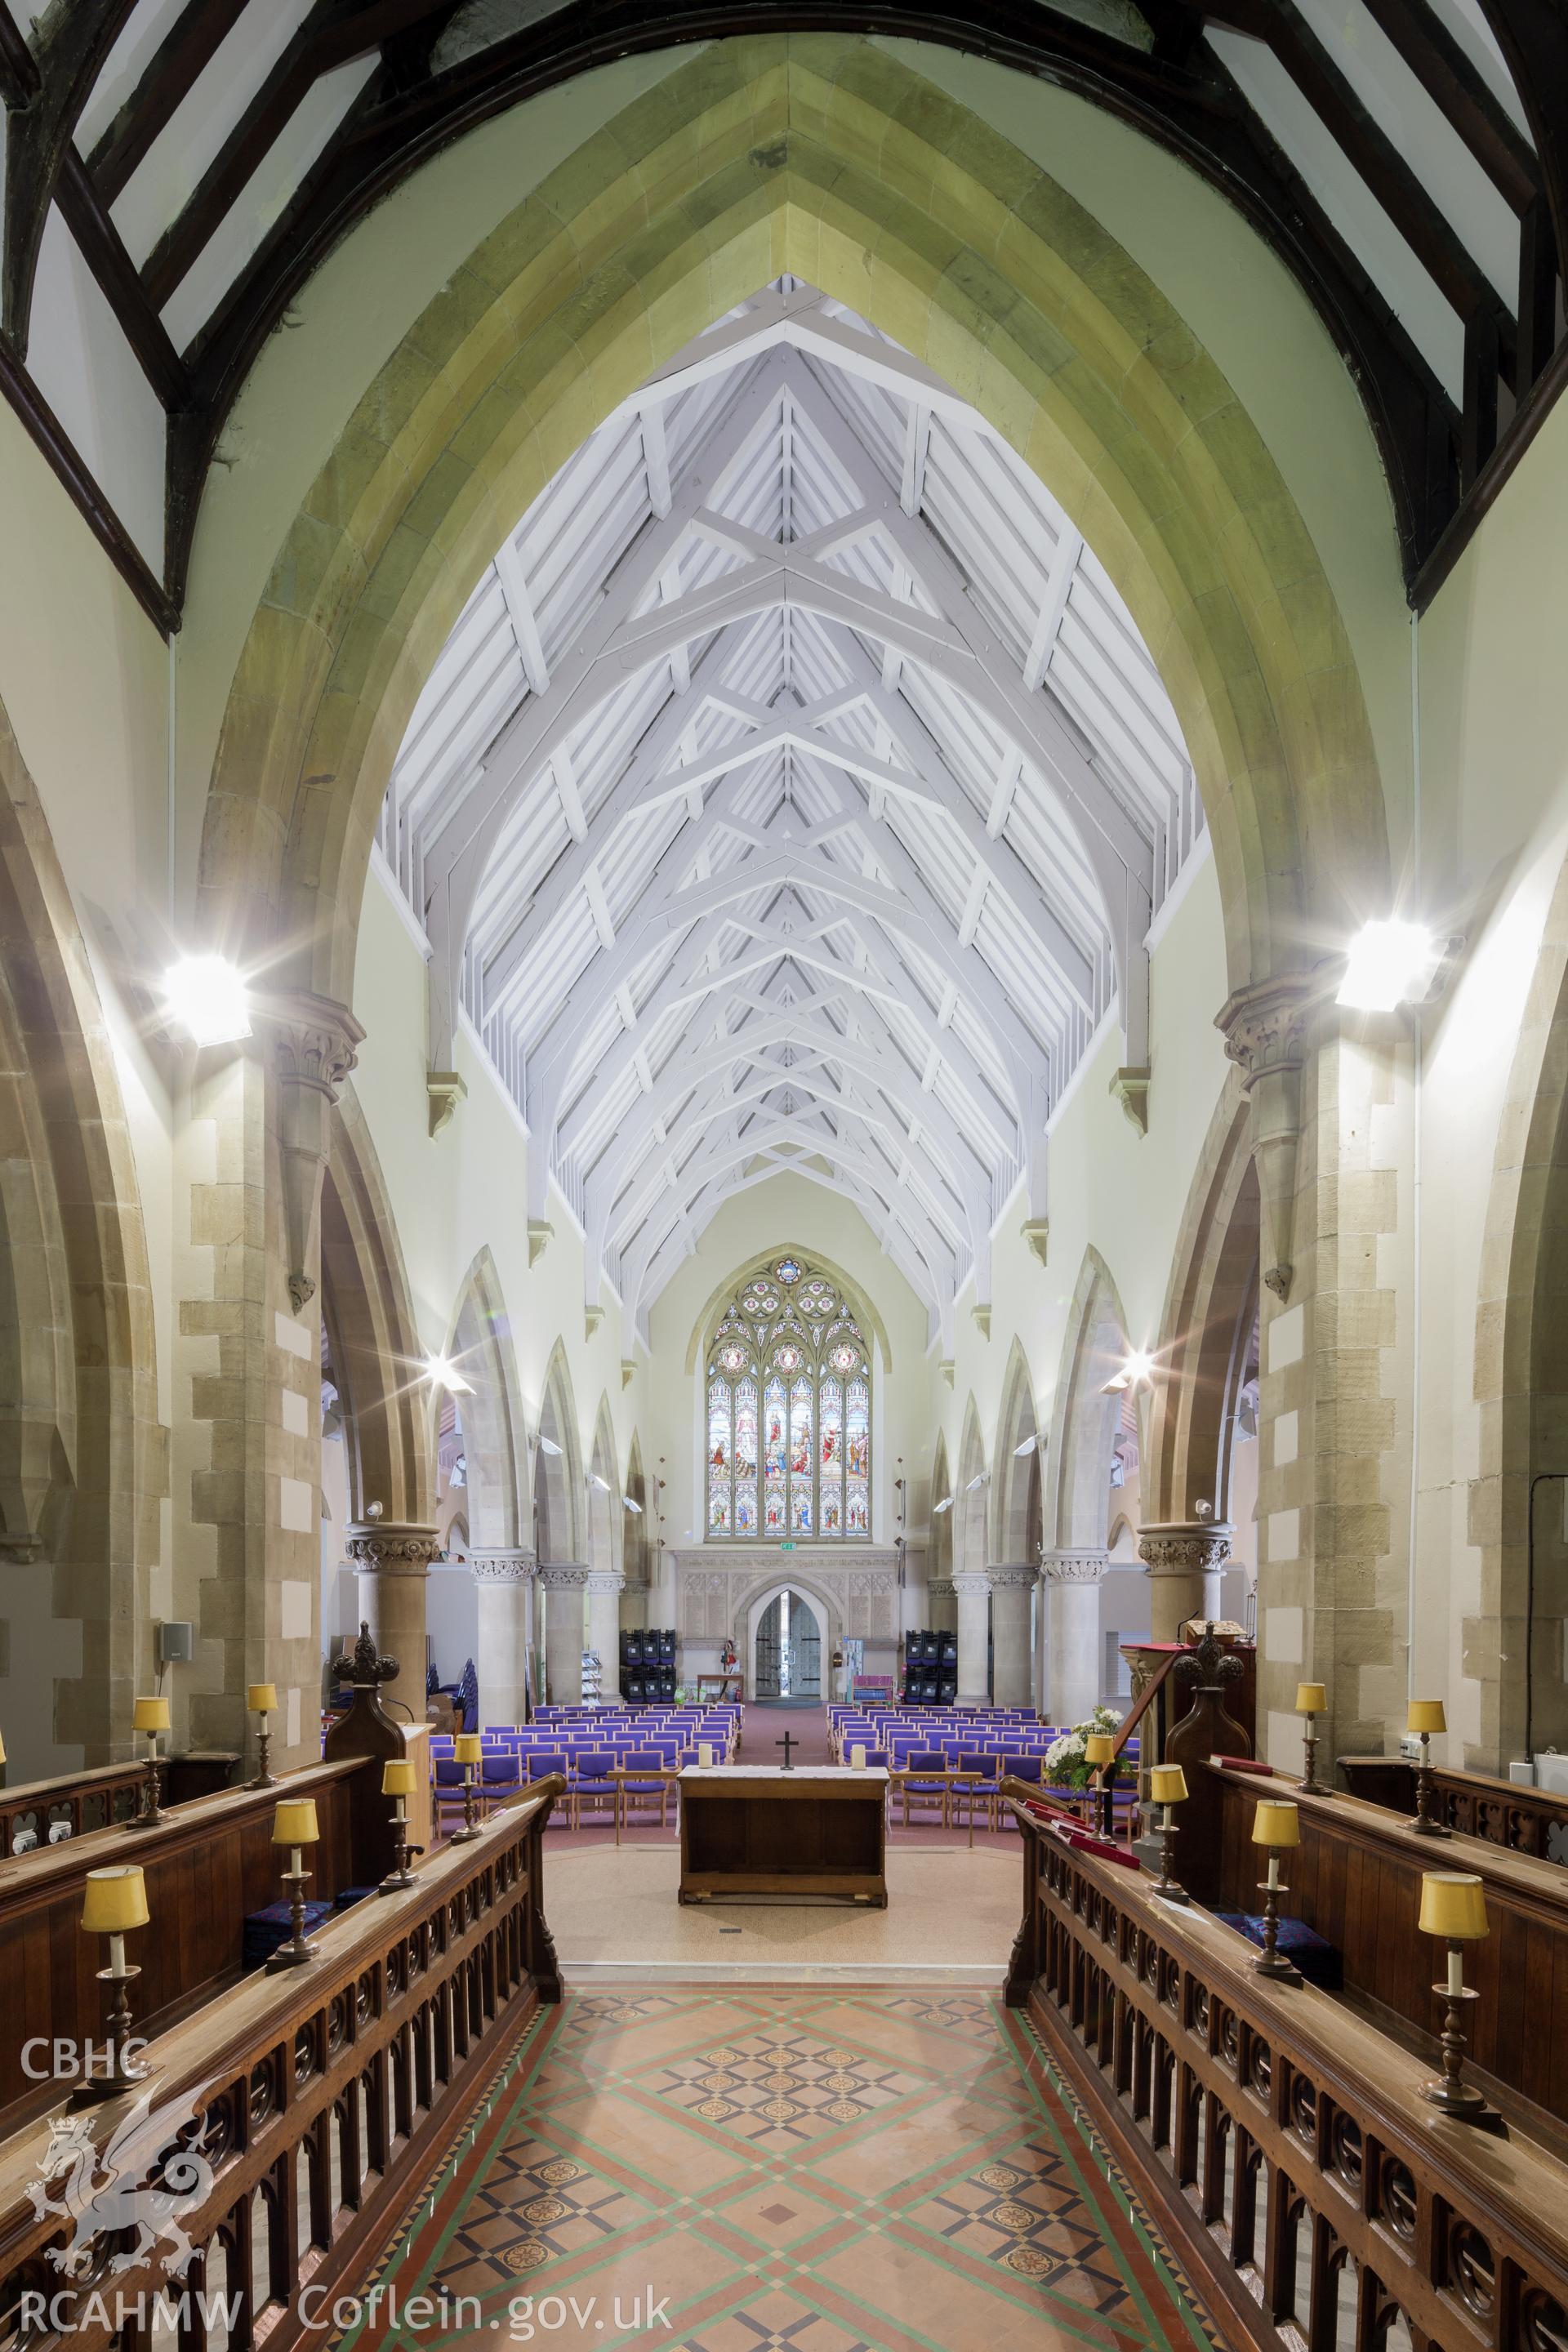 Interior from the altar looking southeast